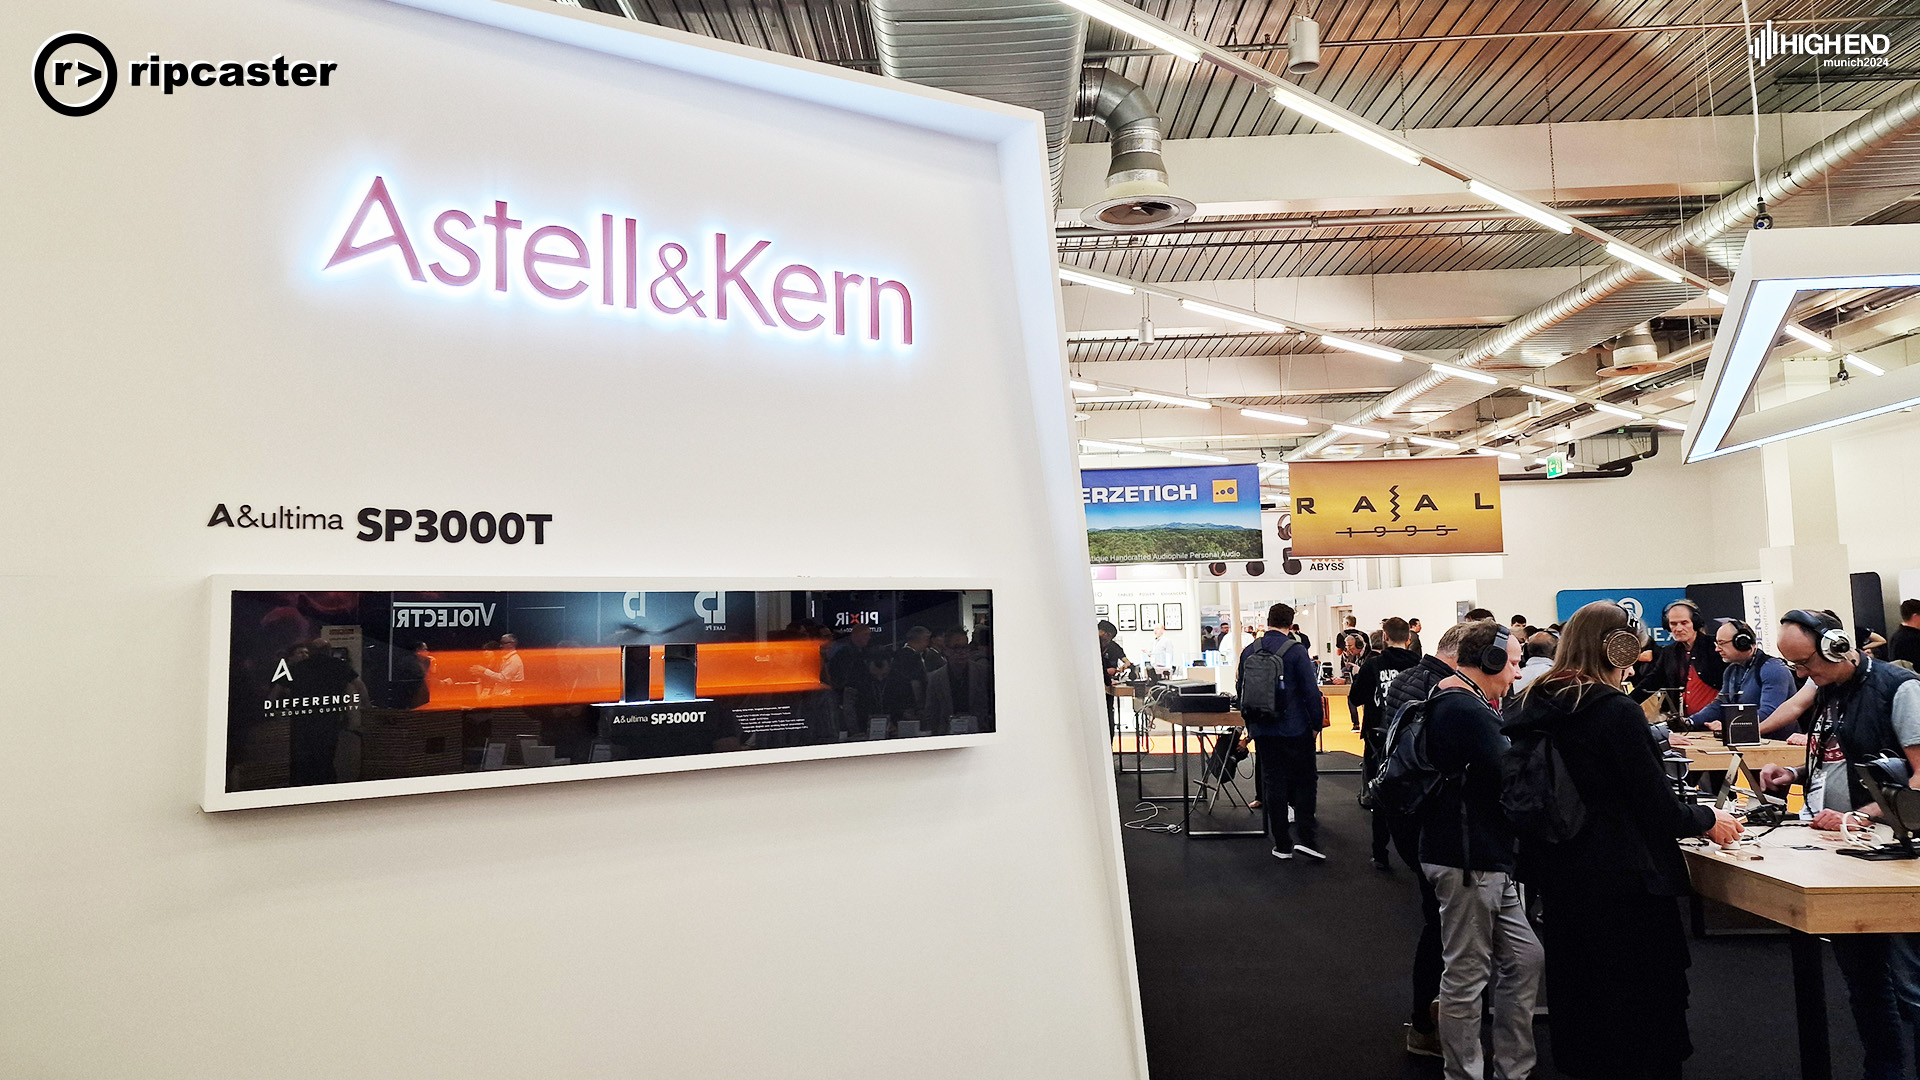 The sign for the Astell & Kern stand to the left with people in headphones to the right